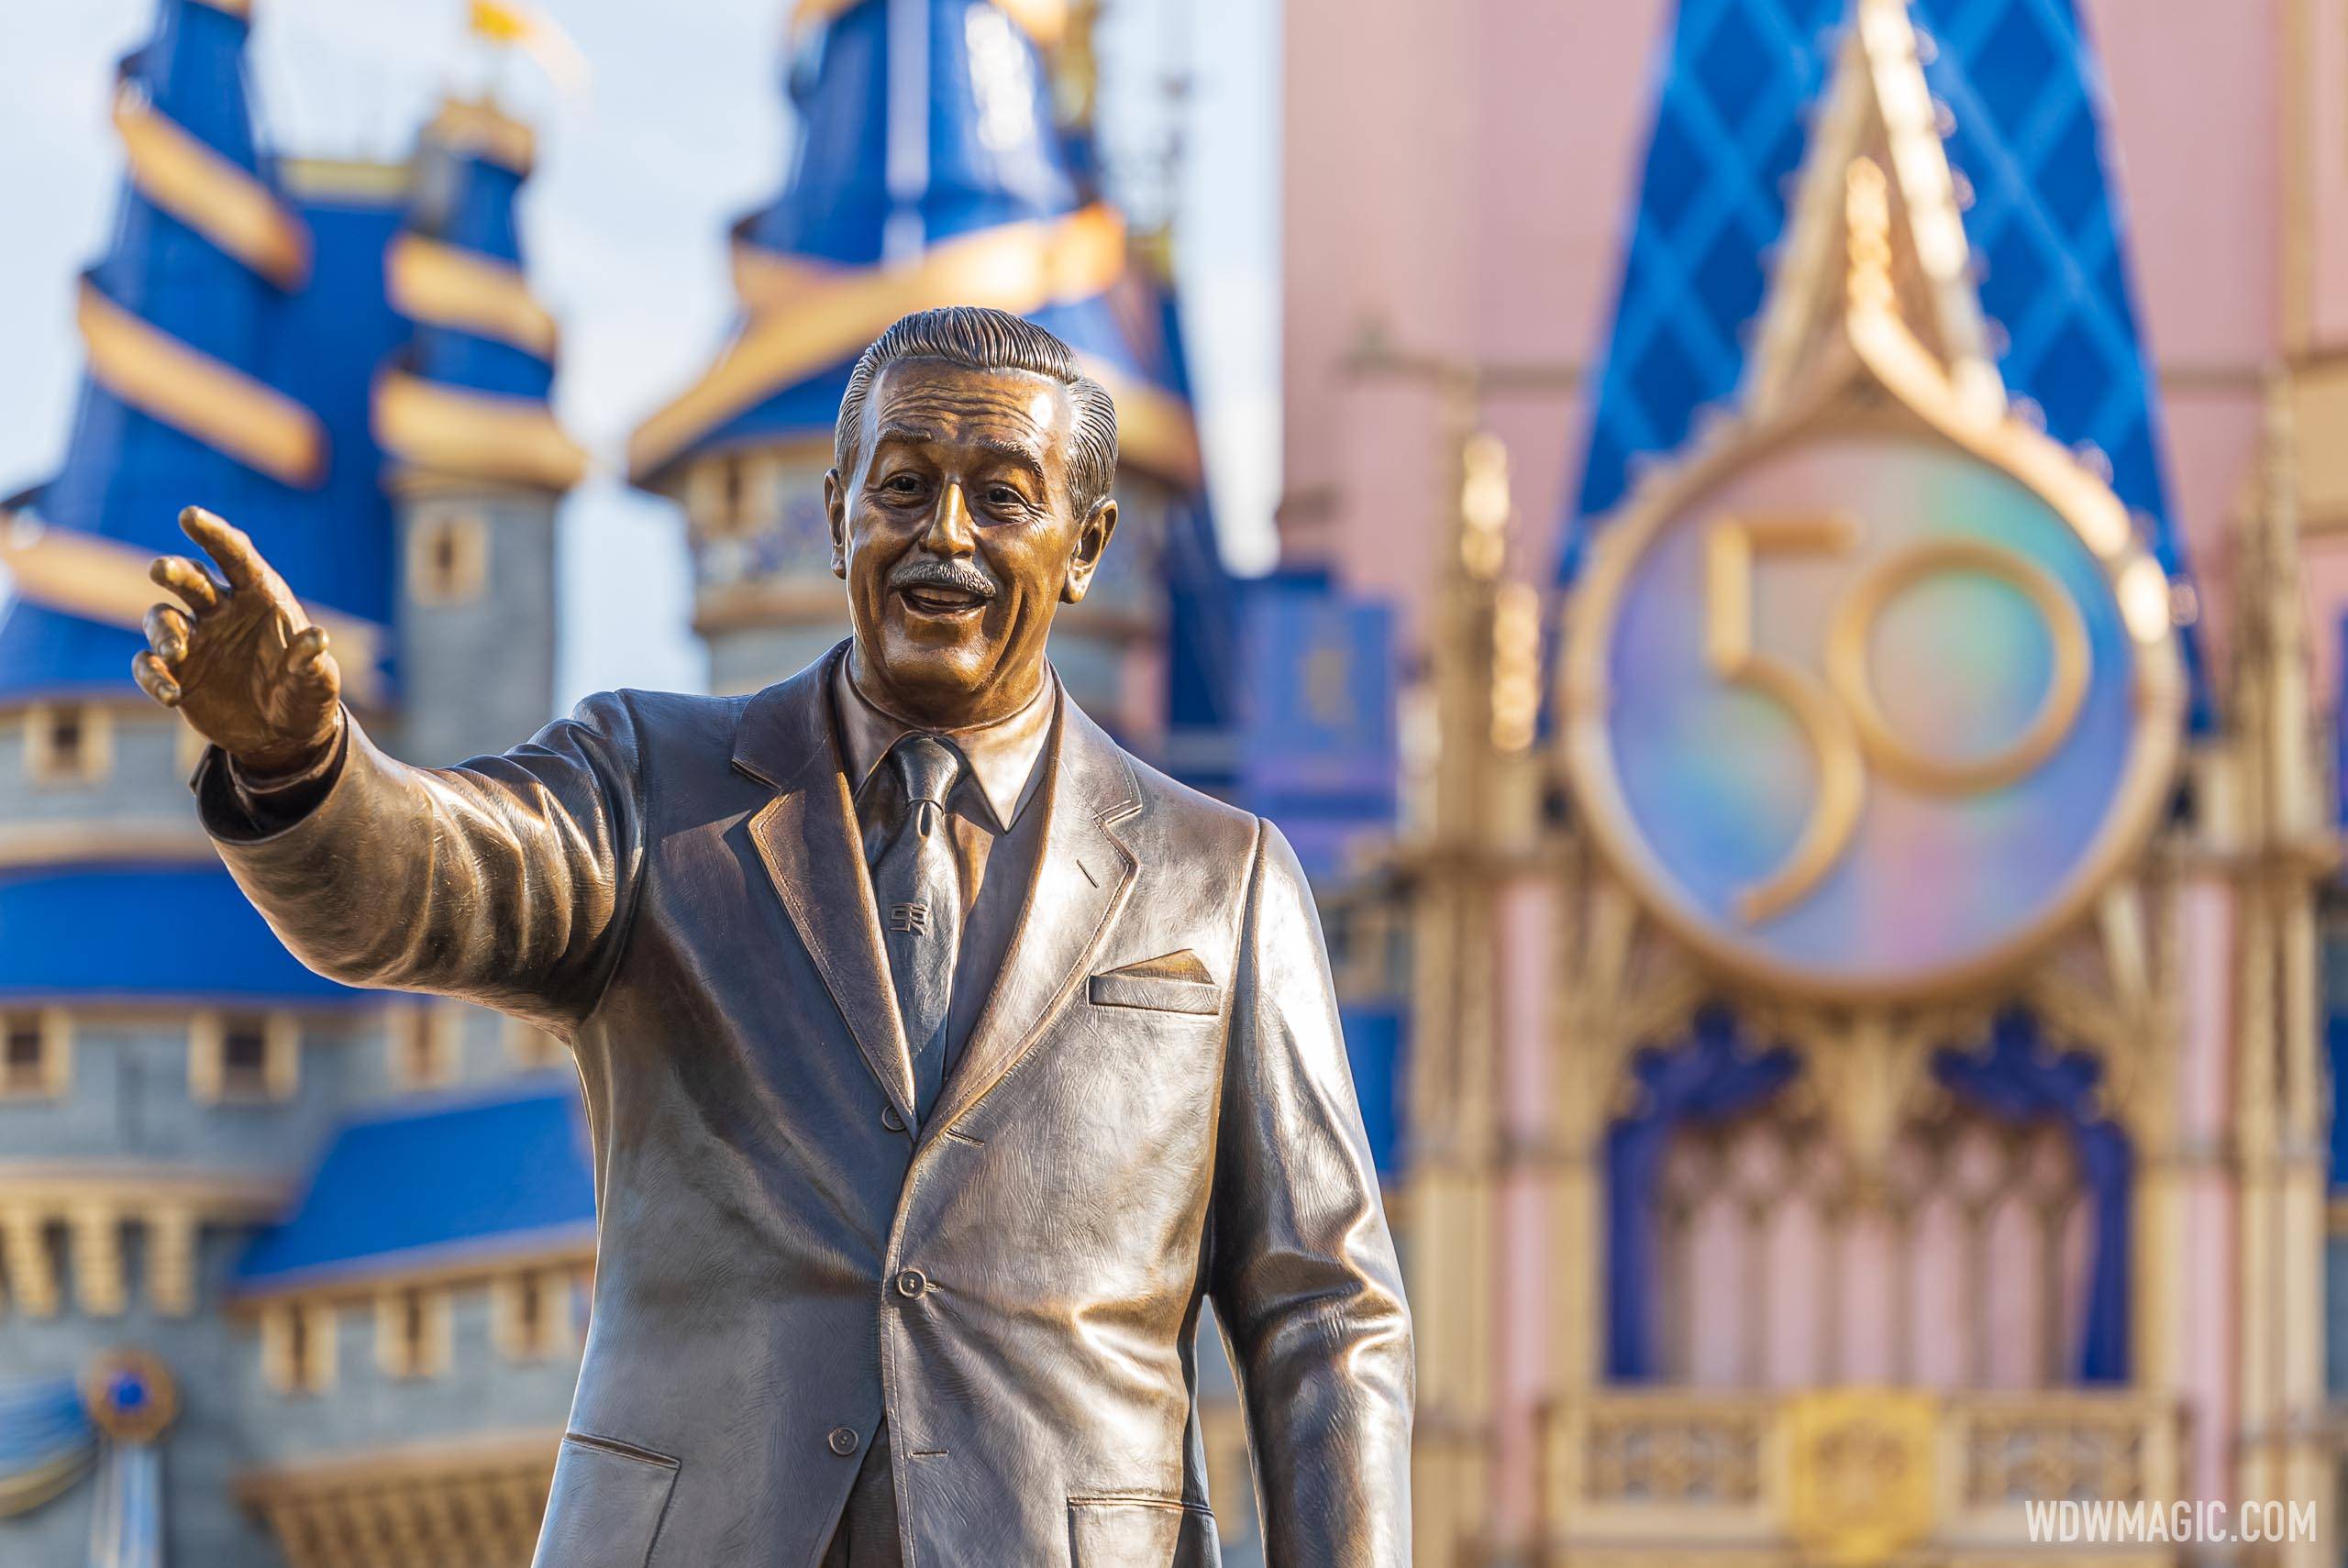 The service celebration will be rescheduled for later this spring at Magic Kingdom